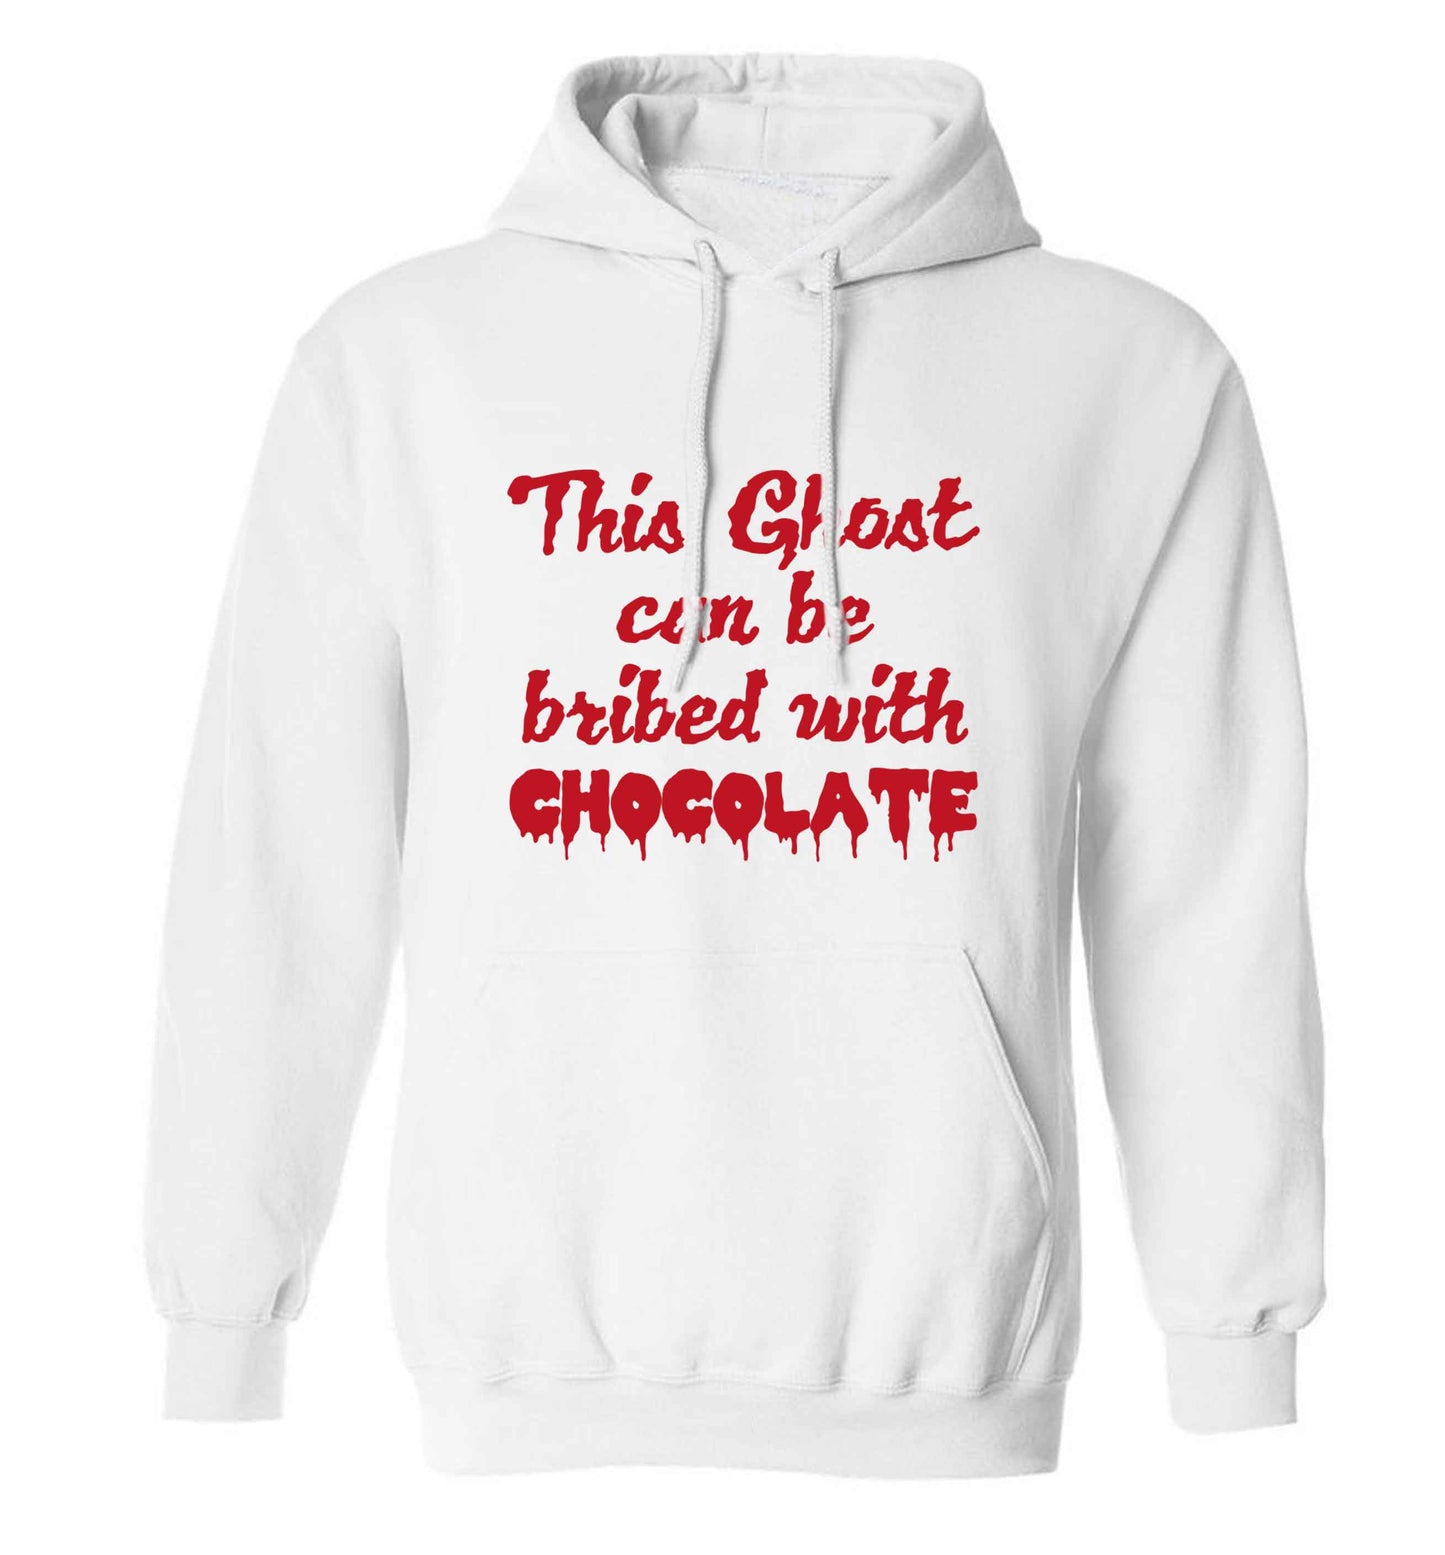 This ghost can be bribed with chocolate adults unisex white hoodie 2XL